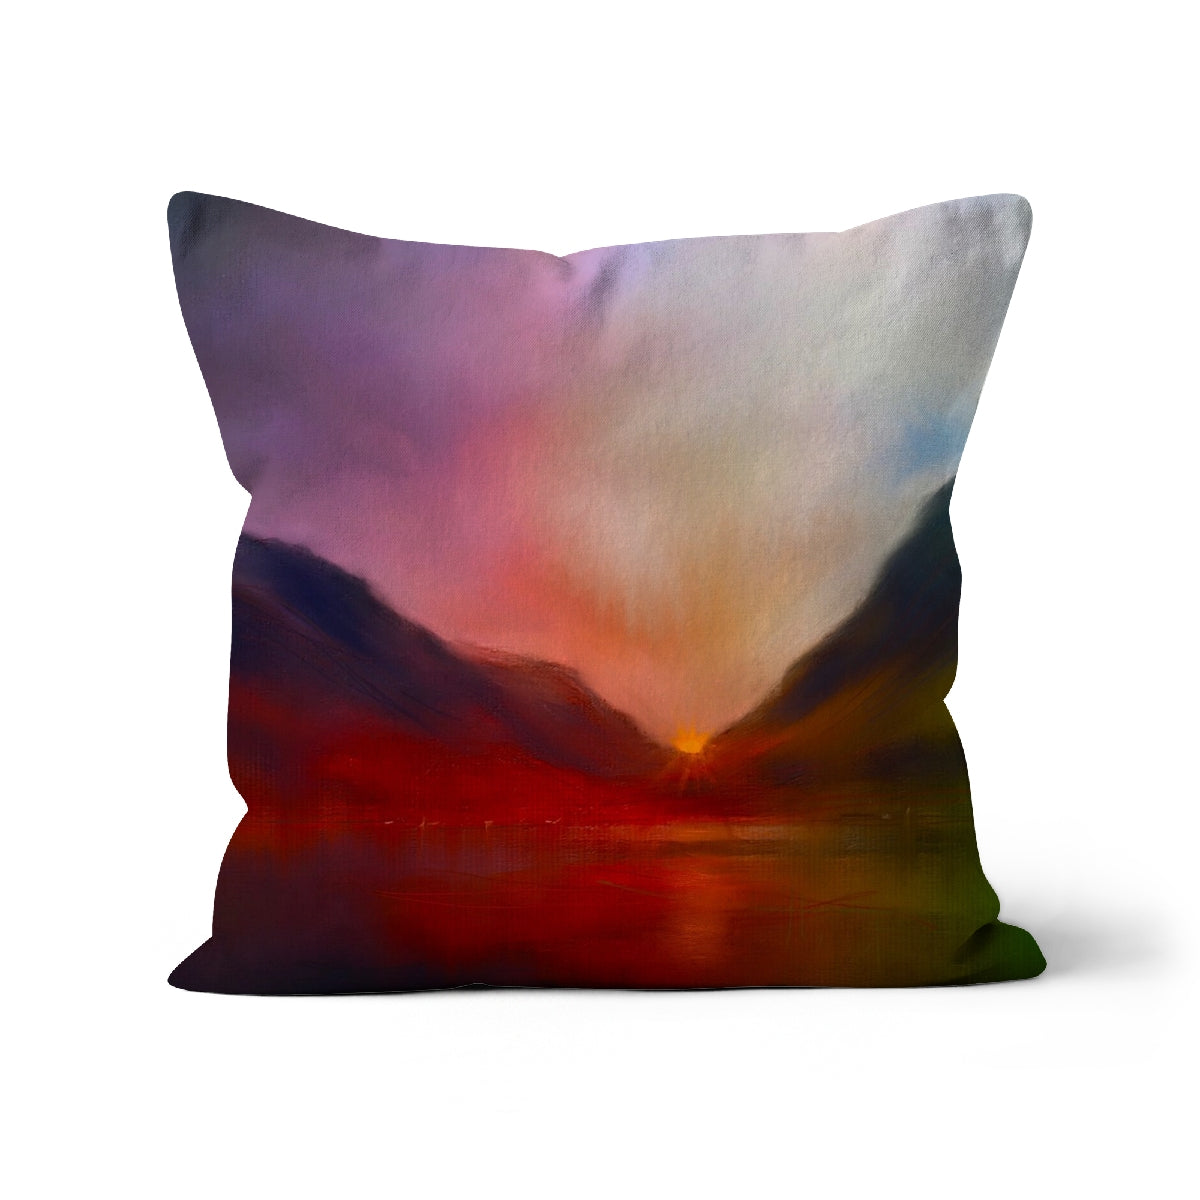 Glencoe Sunset Art Gifts Cushion-Cushions-Glencoe Art Gallery-Faux Suede-22"x22"-Paintings, Prints, Homeware, Art Gifts From Scotland By Scottish Artist Kevin Hunter